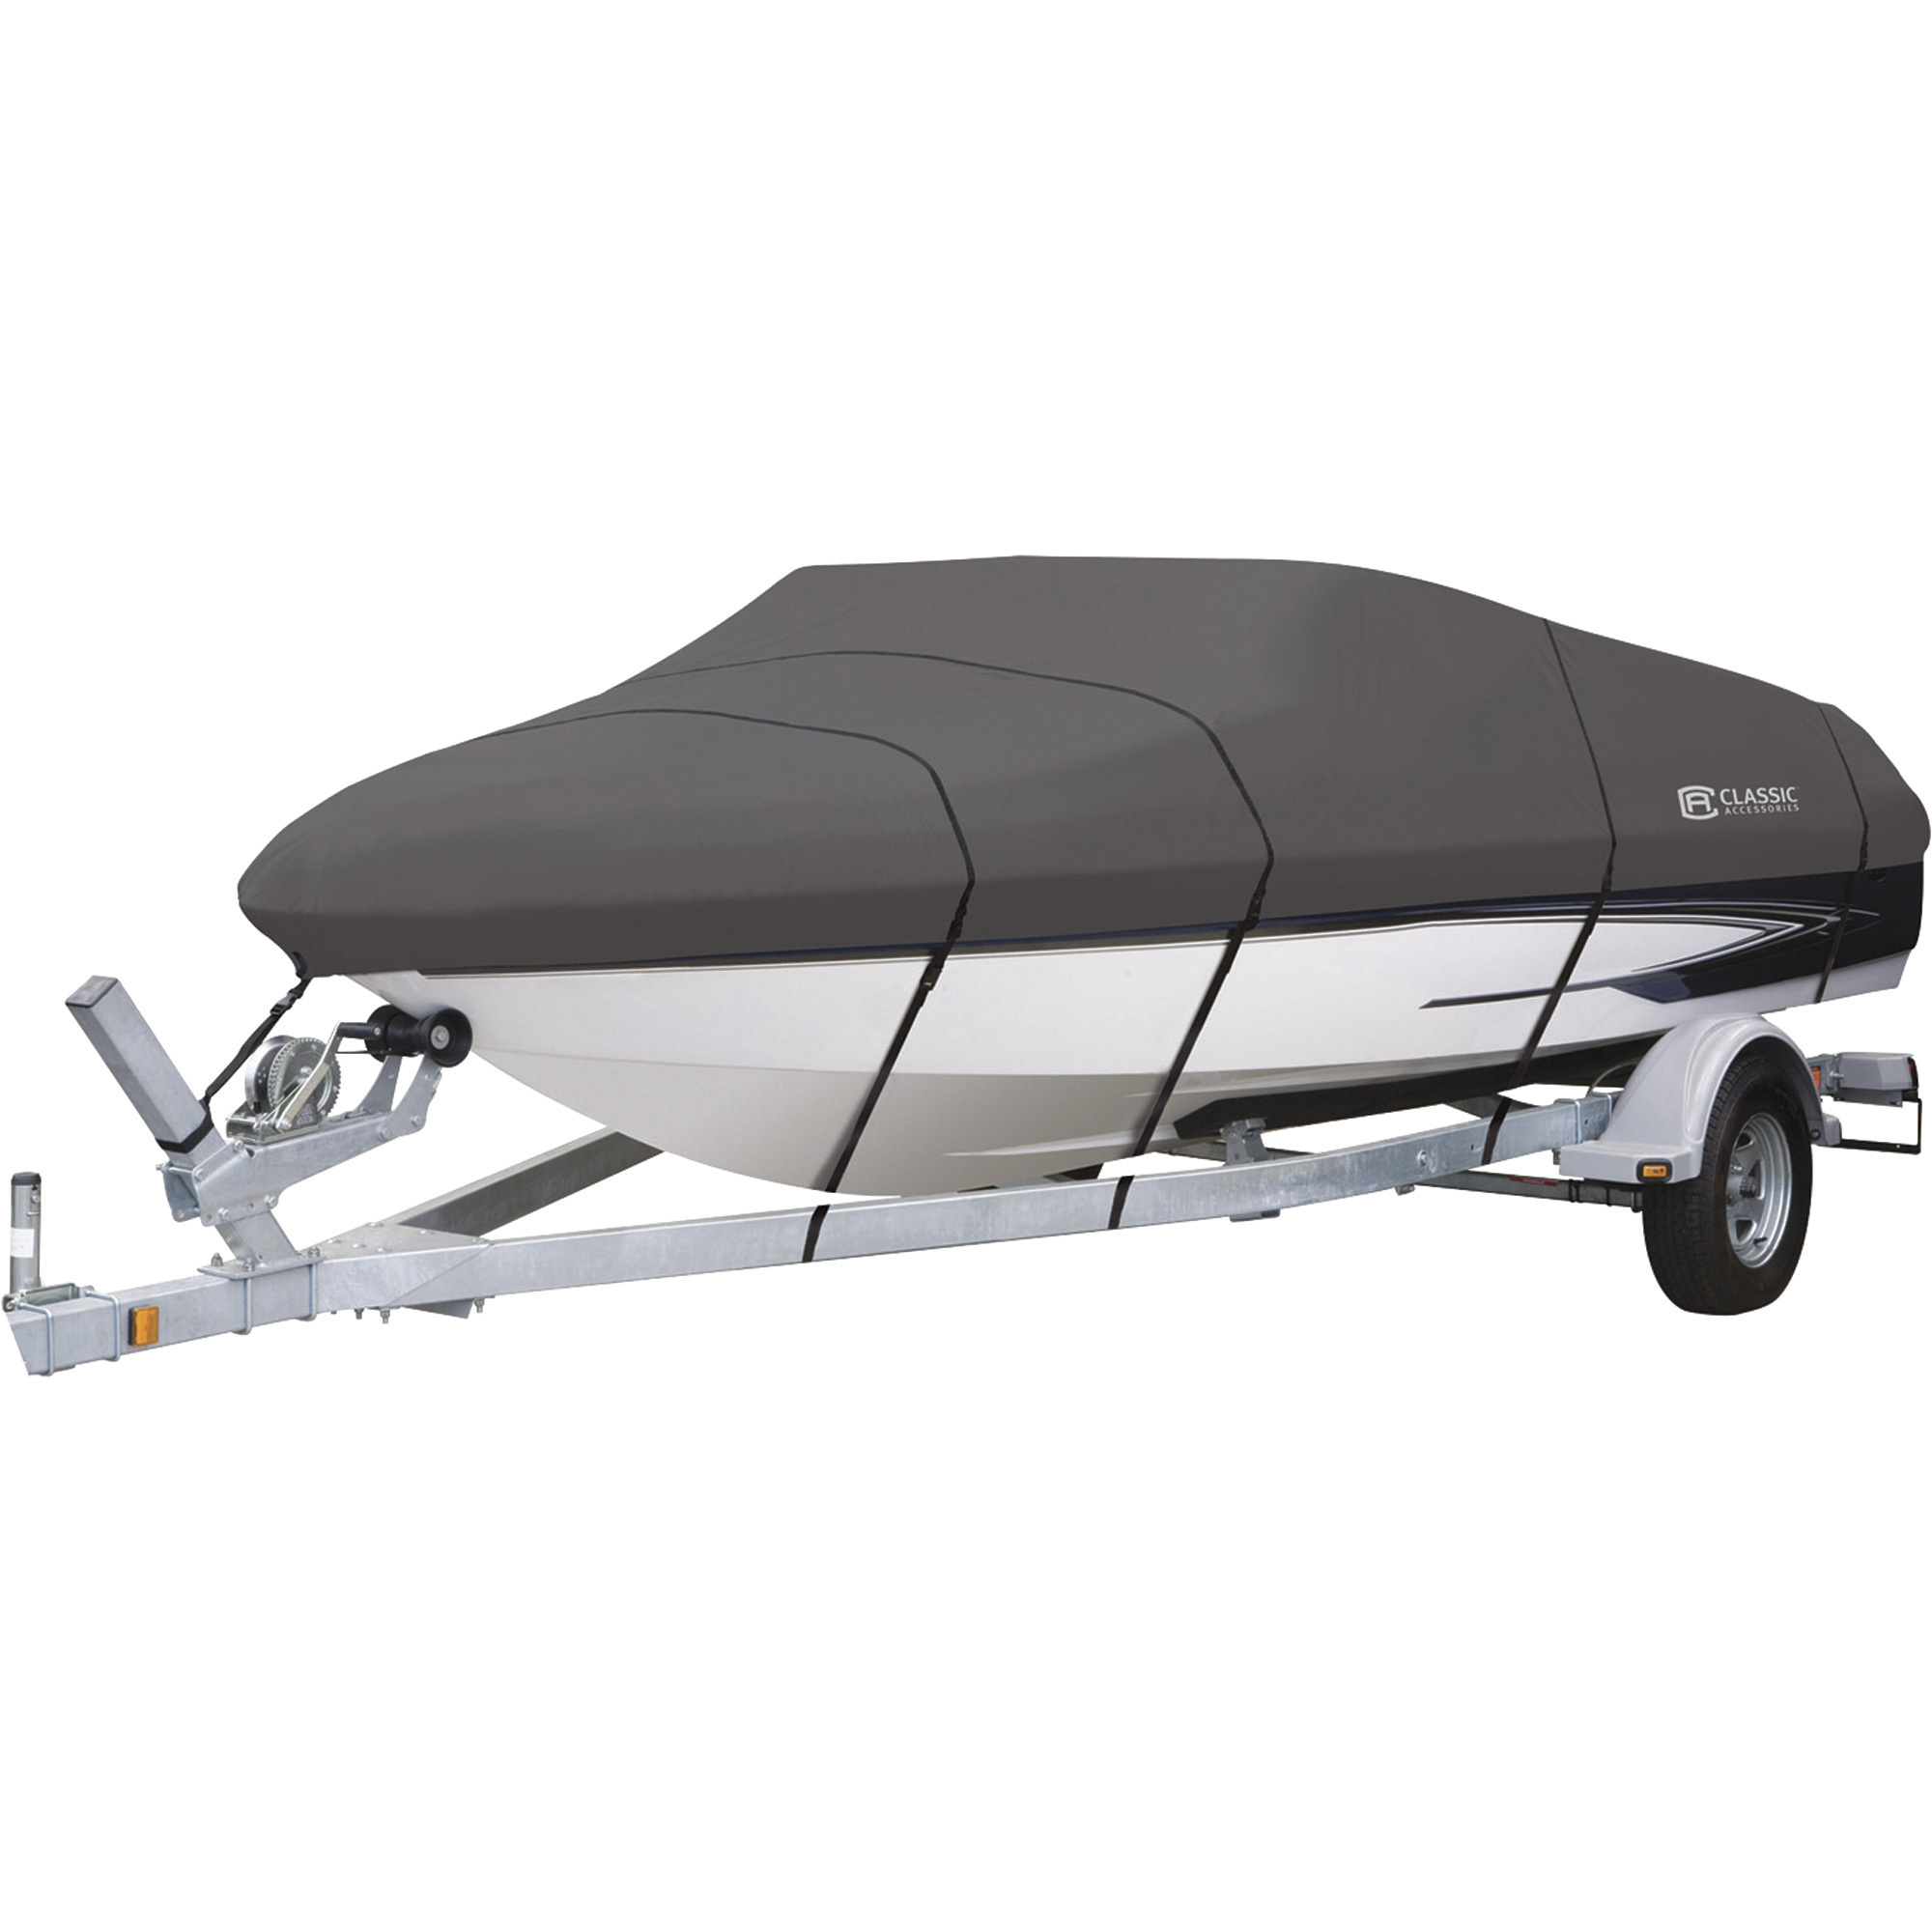 Classic Accessories StormPro Heavy-Duty Boat Cover, Charcoal, Fits 14ft.-16ft. x 72Inch W Boats, Model 88918